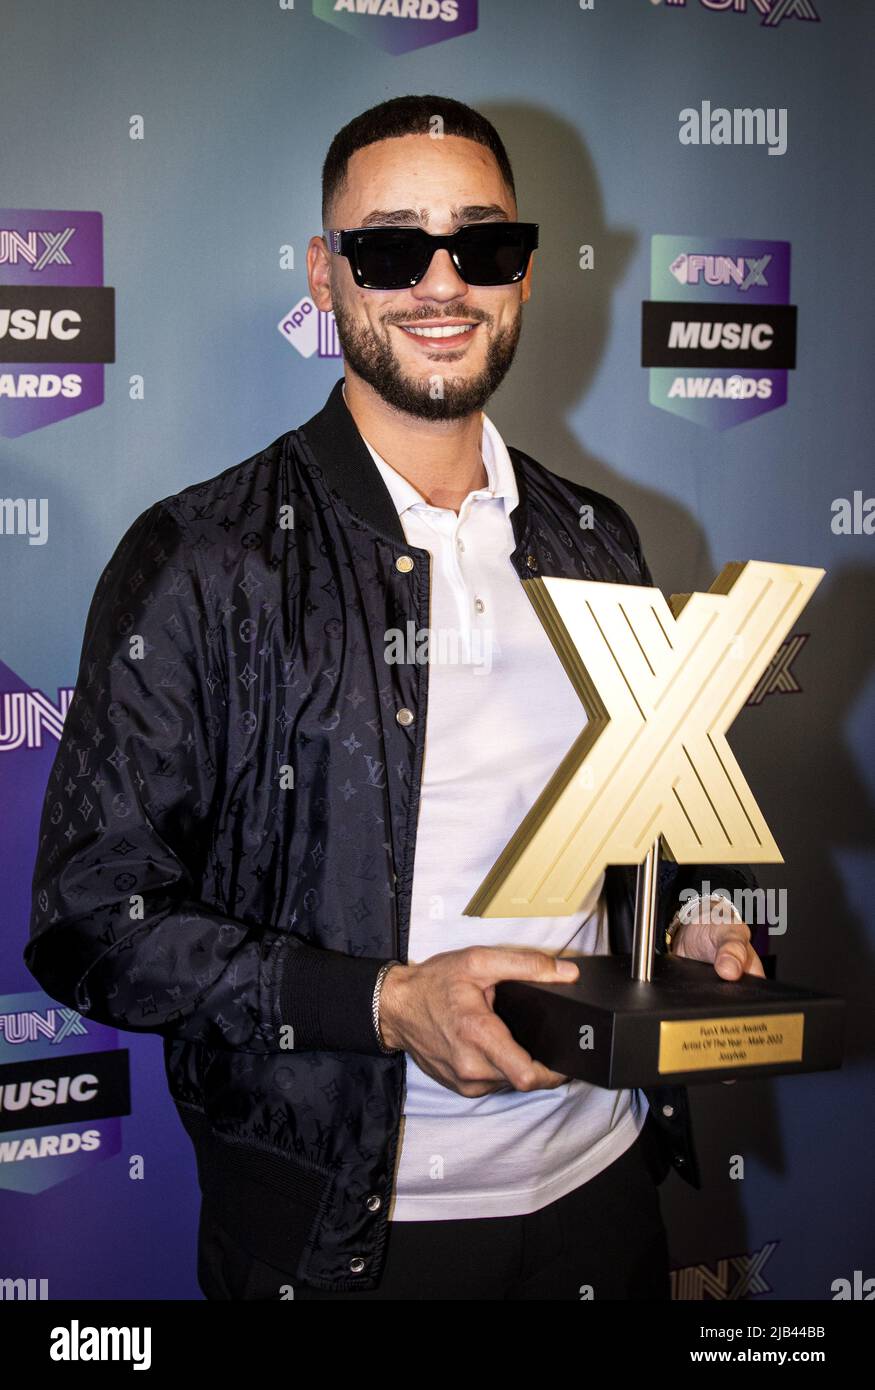 2022-06-02 22:55:39 AMSTERDAM - Josylvio wins the artist of the year male Award during the FunX Music Awards in AFAS Live in Amsterdam. During the award show, the most important music prizes of the young Netherlands were presented. ANP RAMON VAN FLYMEN netherlands out - belgium out Stock Photo